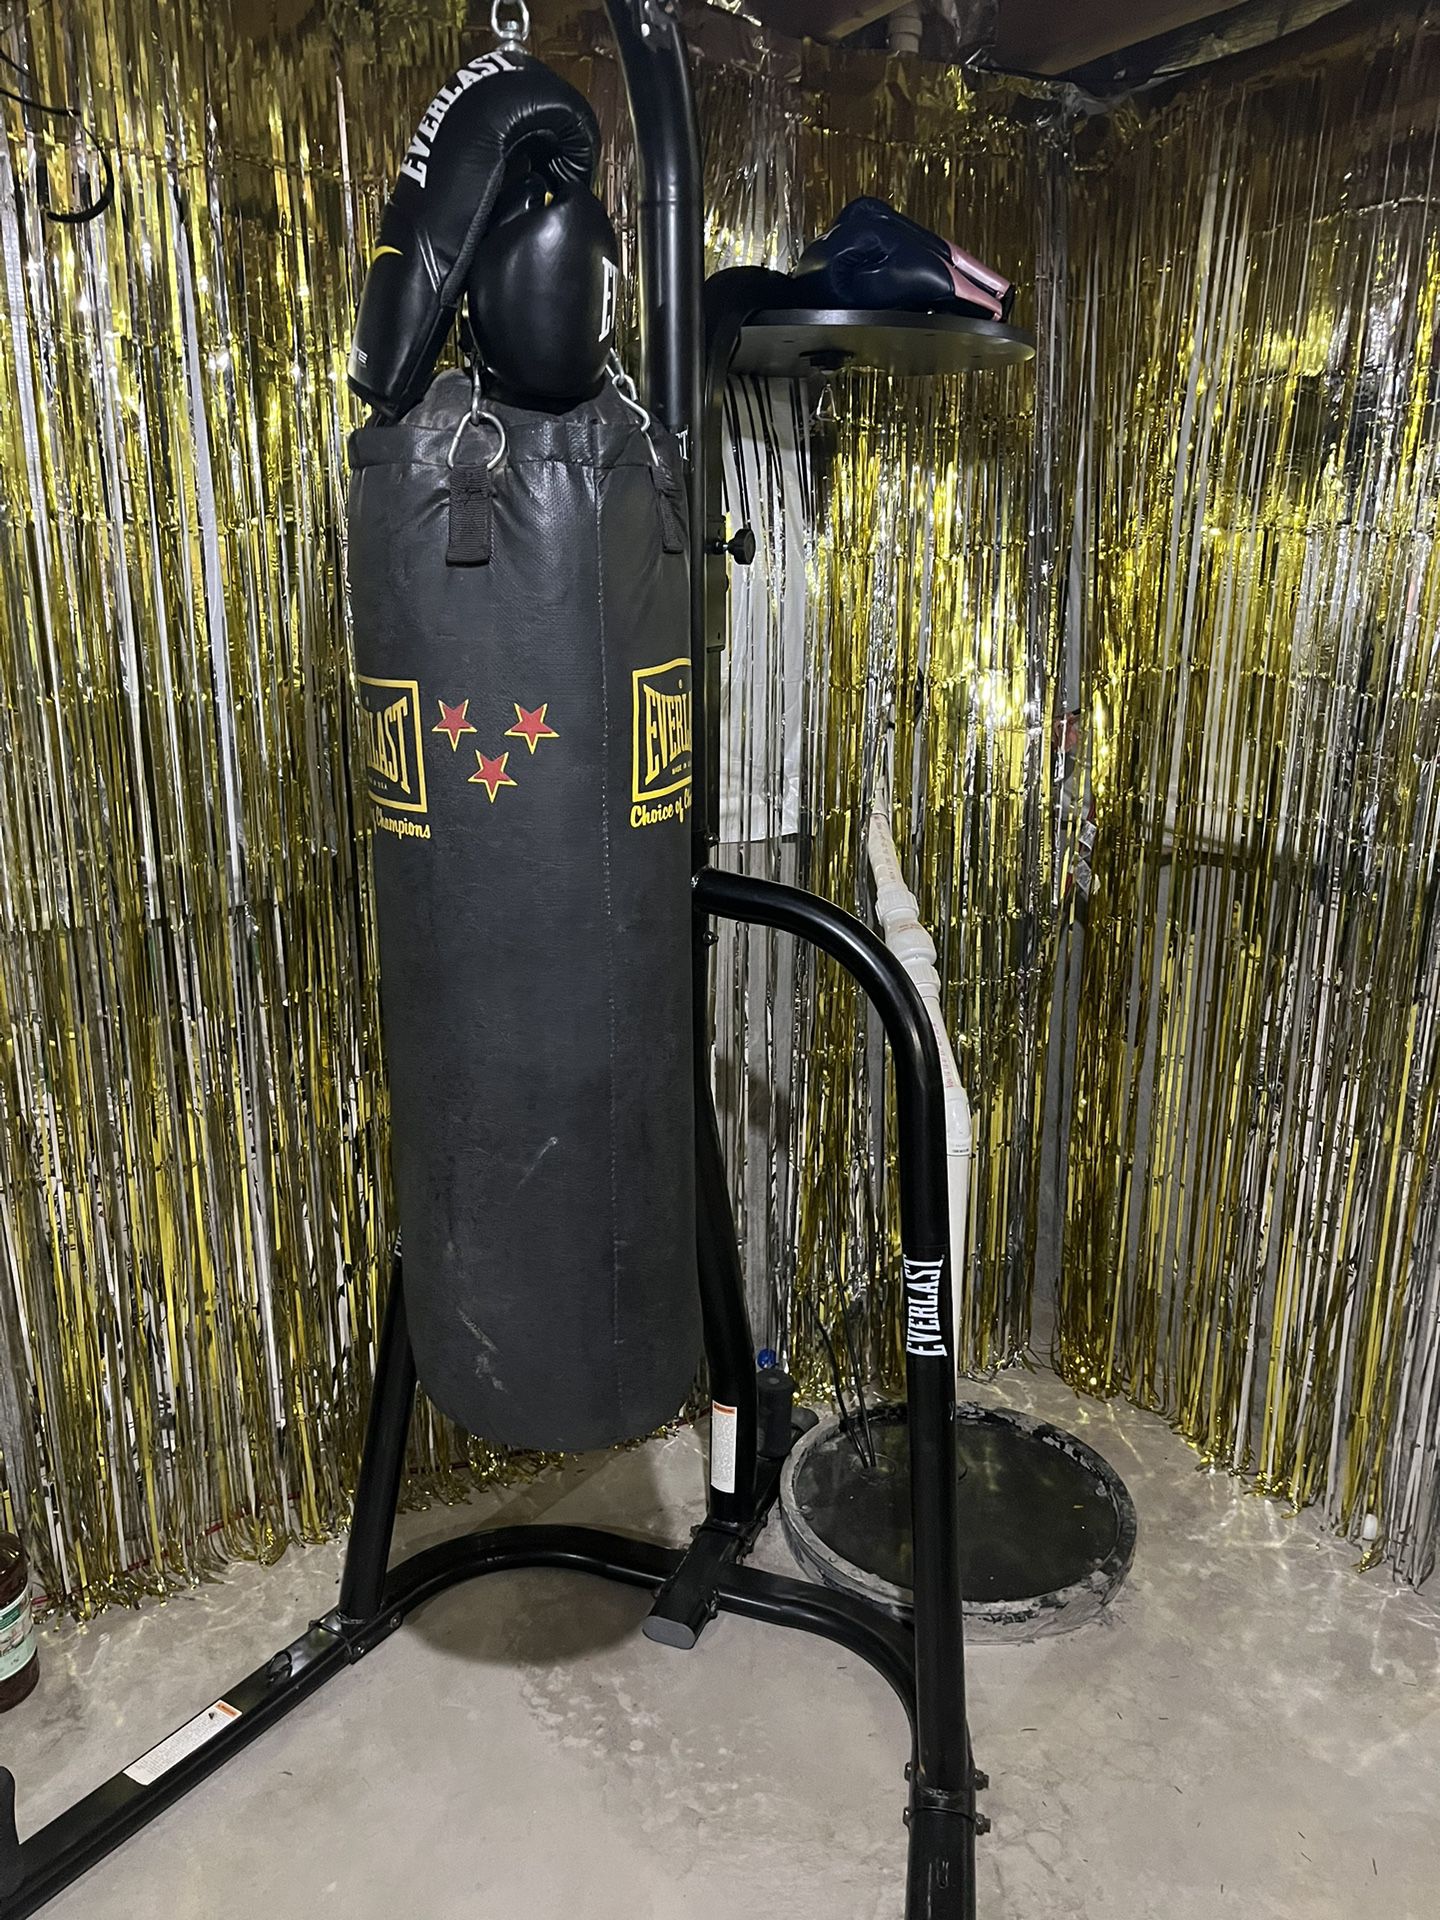 Everlast Dual Stand, With heavy bag and Two sets of gloves. 